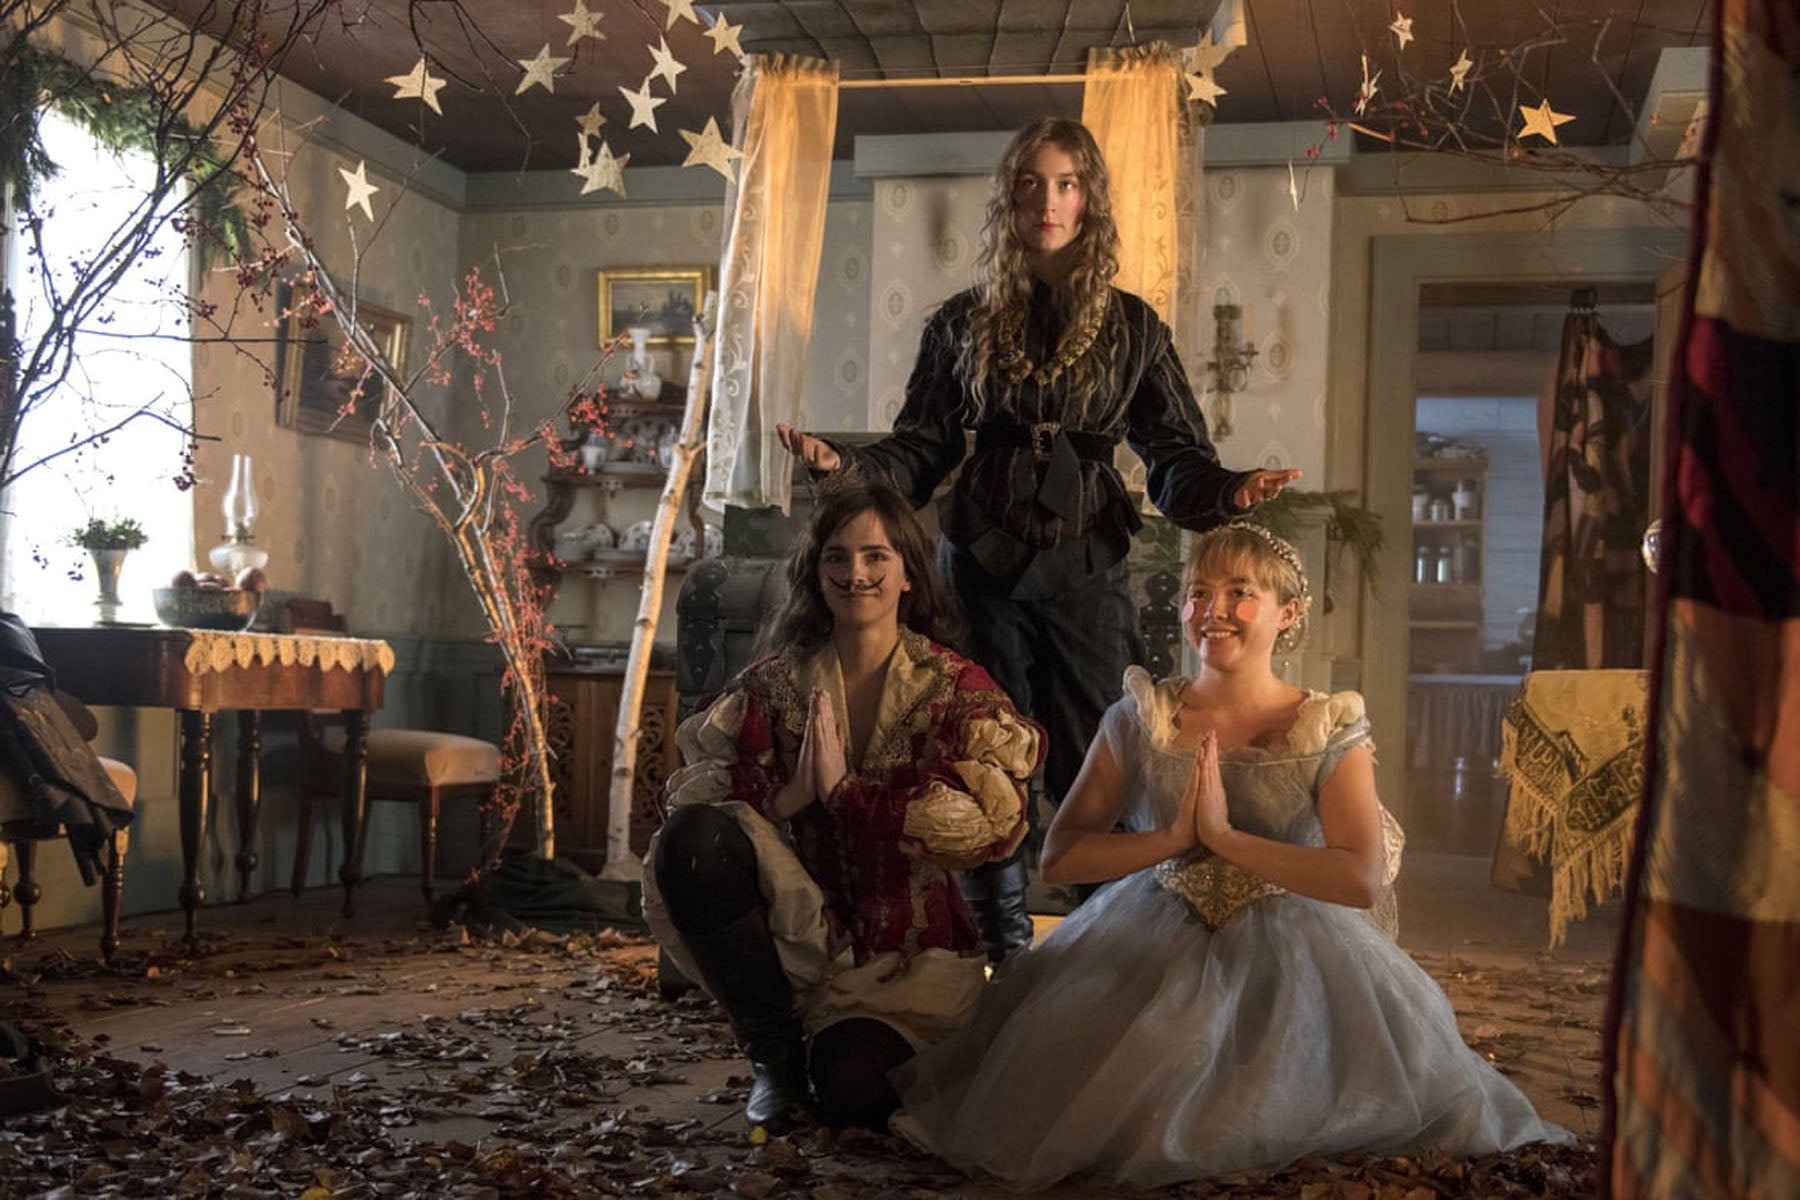 Screen still from Greta Gerwig's 2019 Little Women featuring three of the March sisters dressed up for a Christmas play in their living room